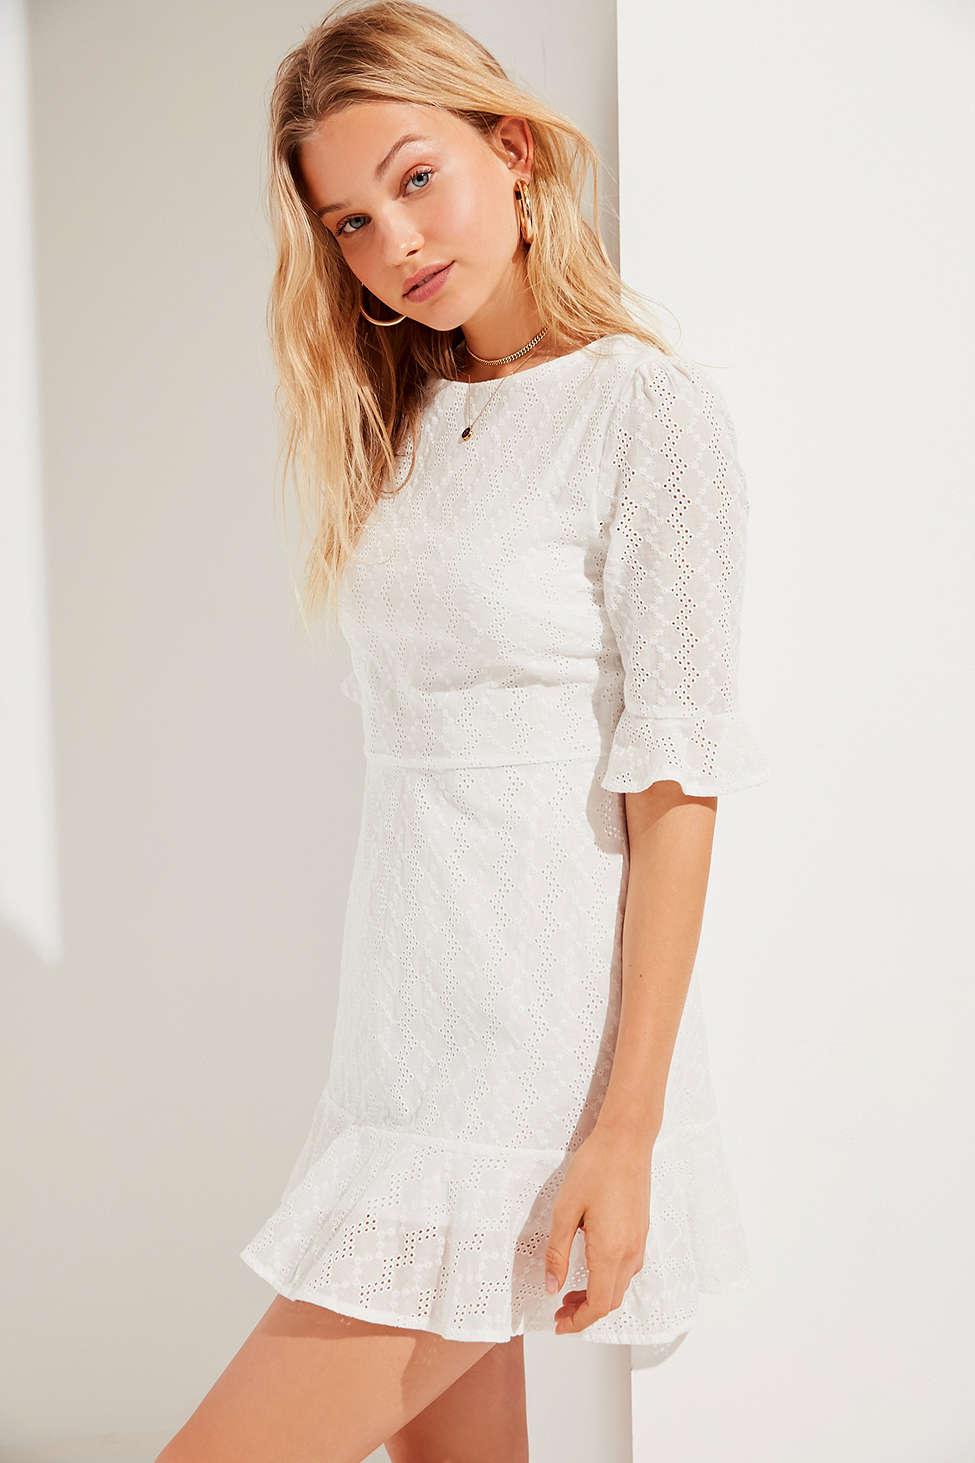 Urban Outfitters Uo Embroidered Eyelet Ruffle Mini Dress in White - Lyst